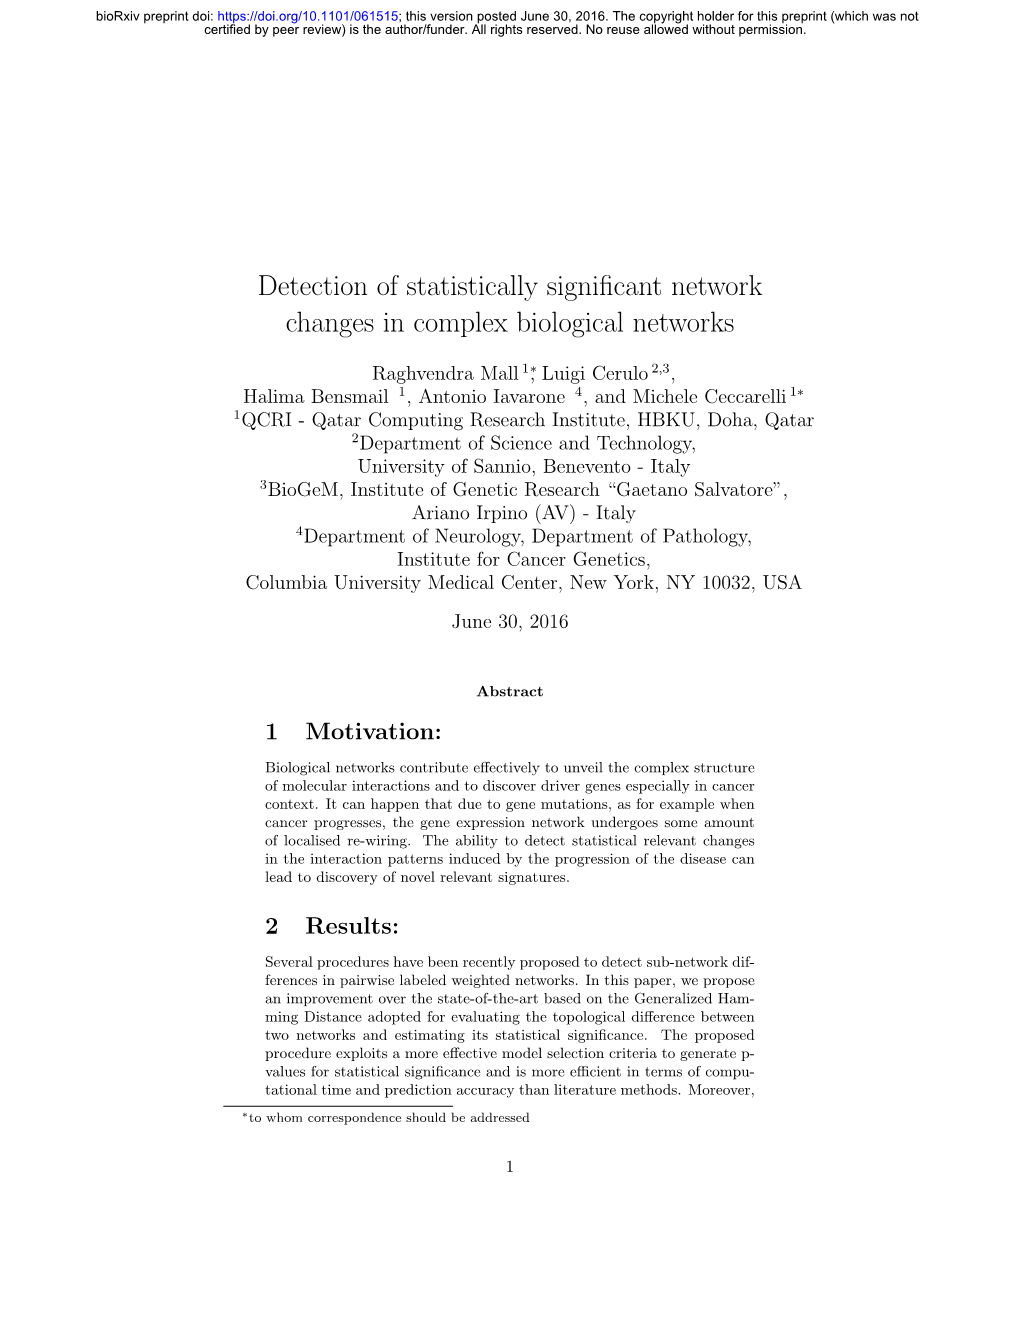 Detection of Statistically Significant Network Changes in Complex Biological Networks